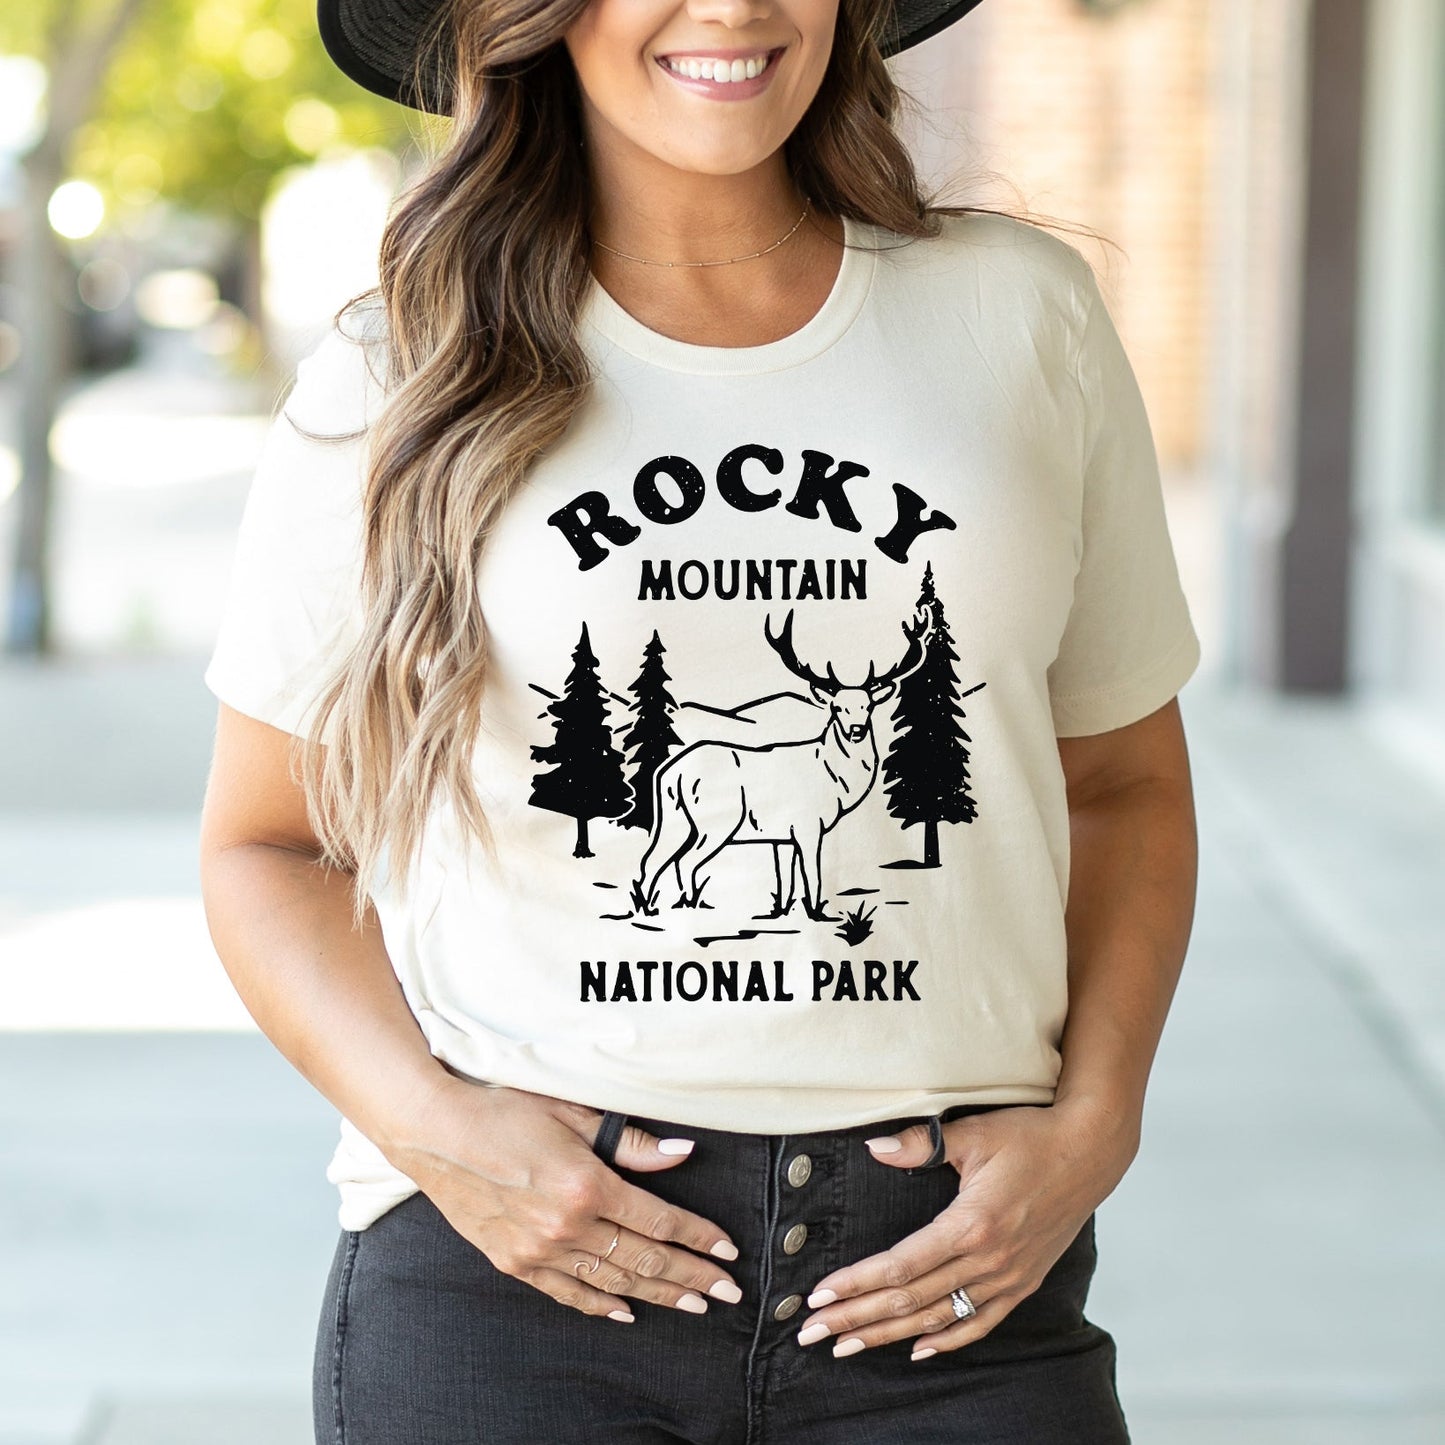 Clearance Vintage Rocky Mountains National Park | Short Sleeve Graphic Tee